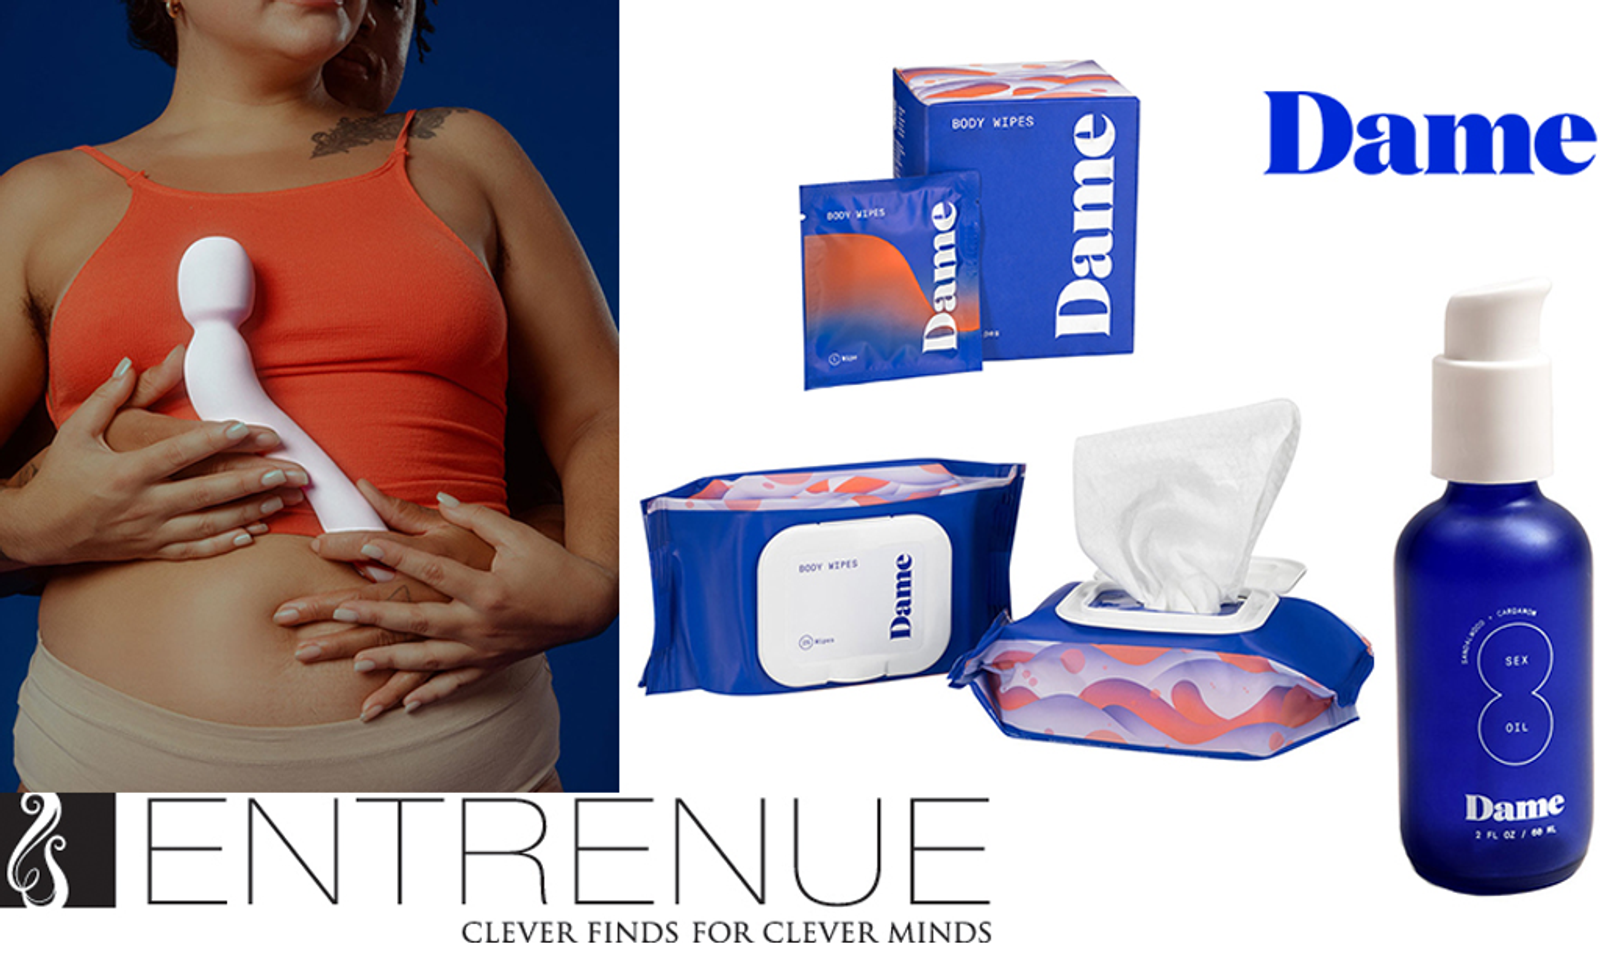 Entrenue Now Shipping Dame's New 'Com' Wand, Sex Oil & Body Wipes